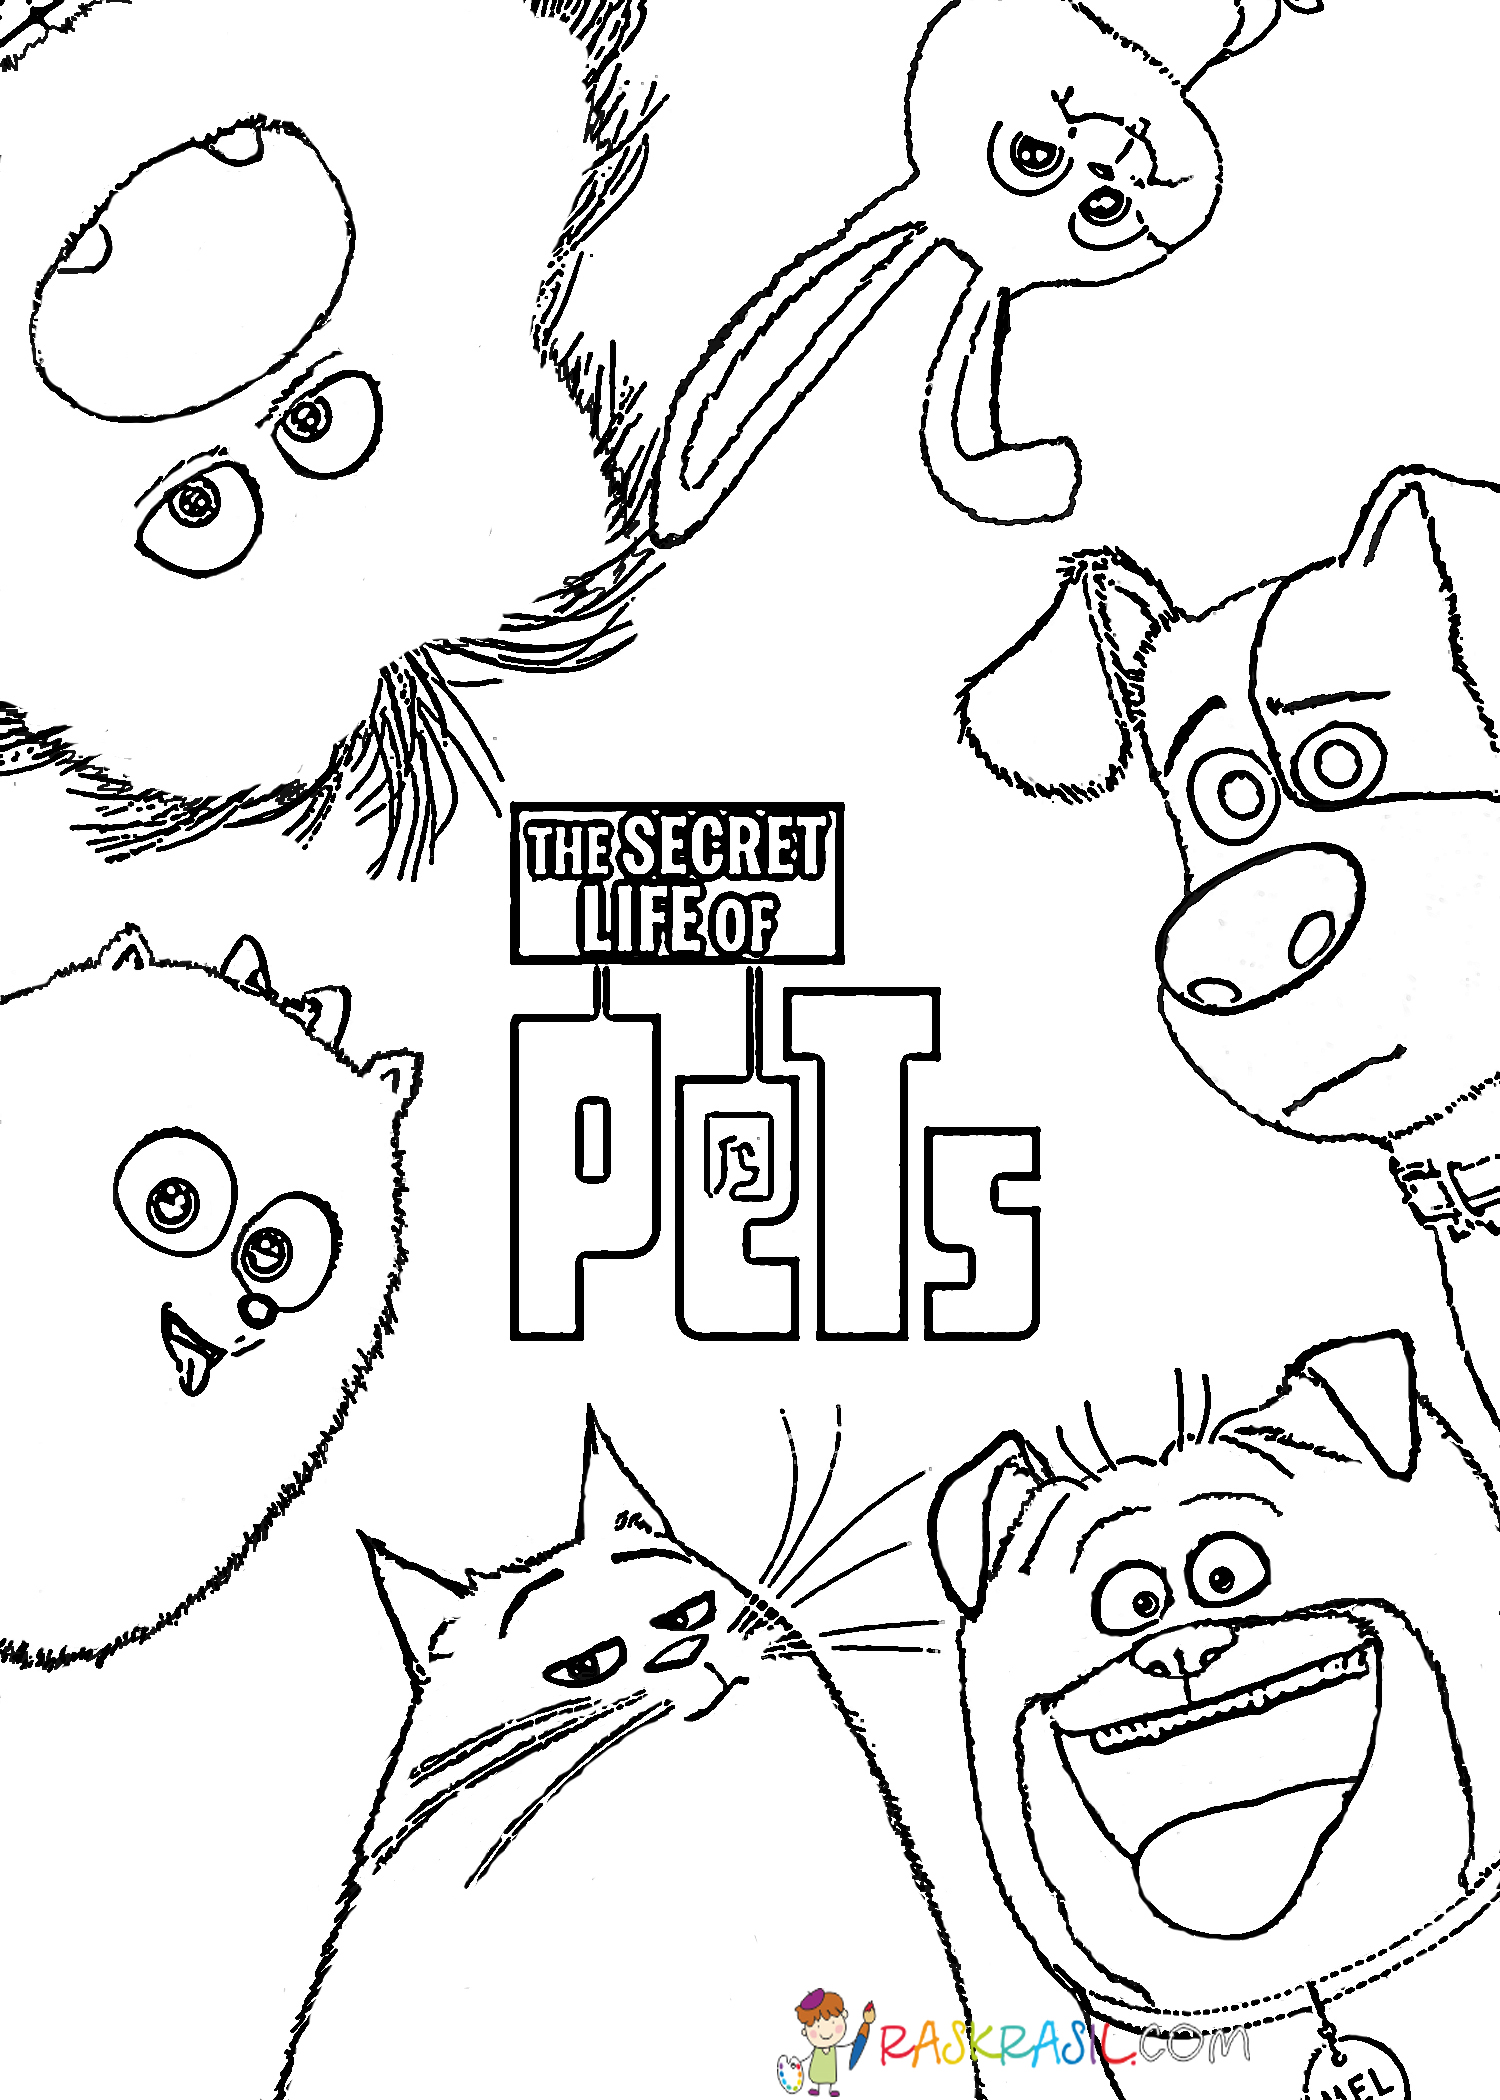 The Secret Life of Pets Coloring Pages. Print Them for Free!